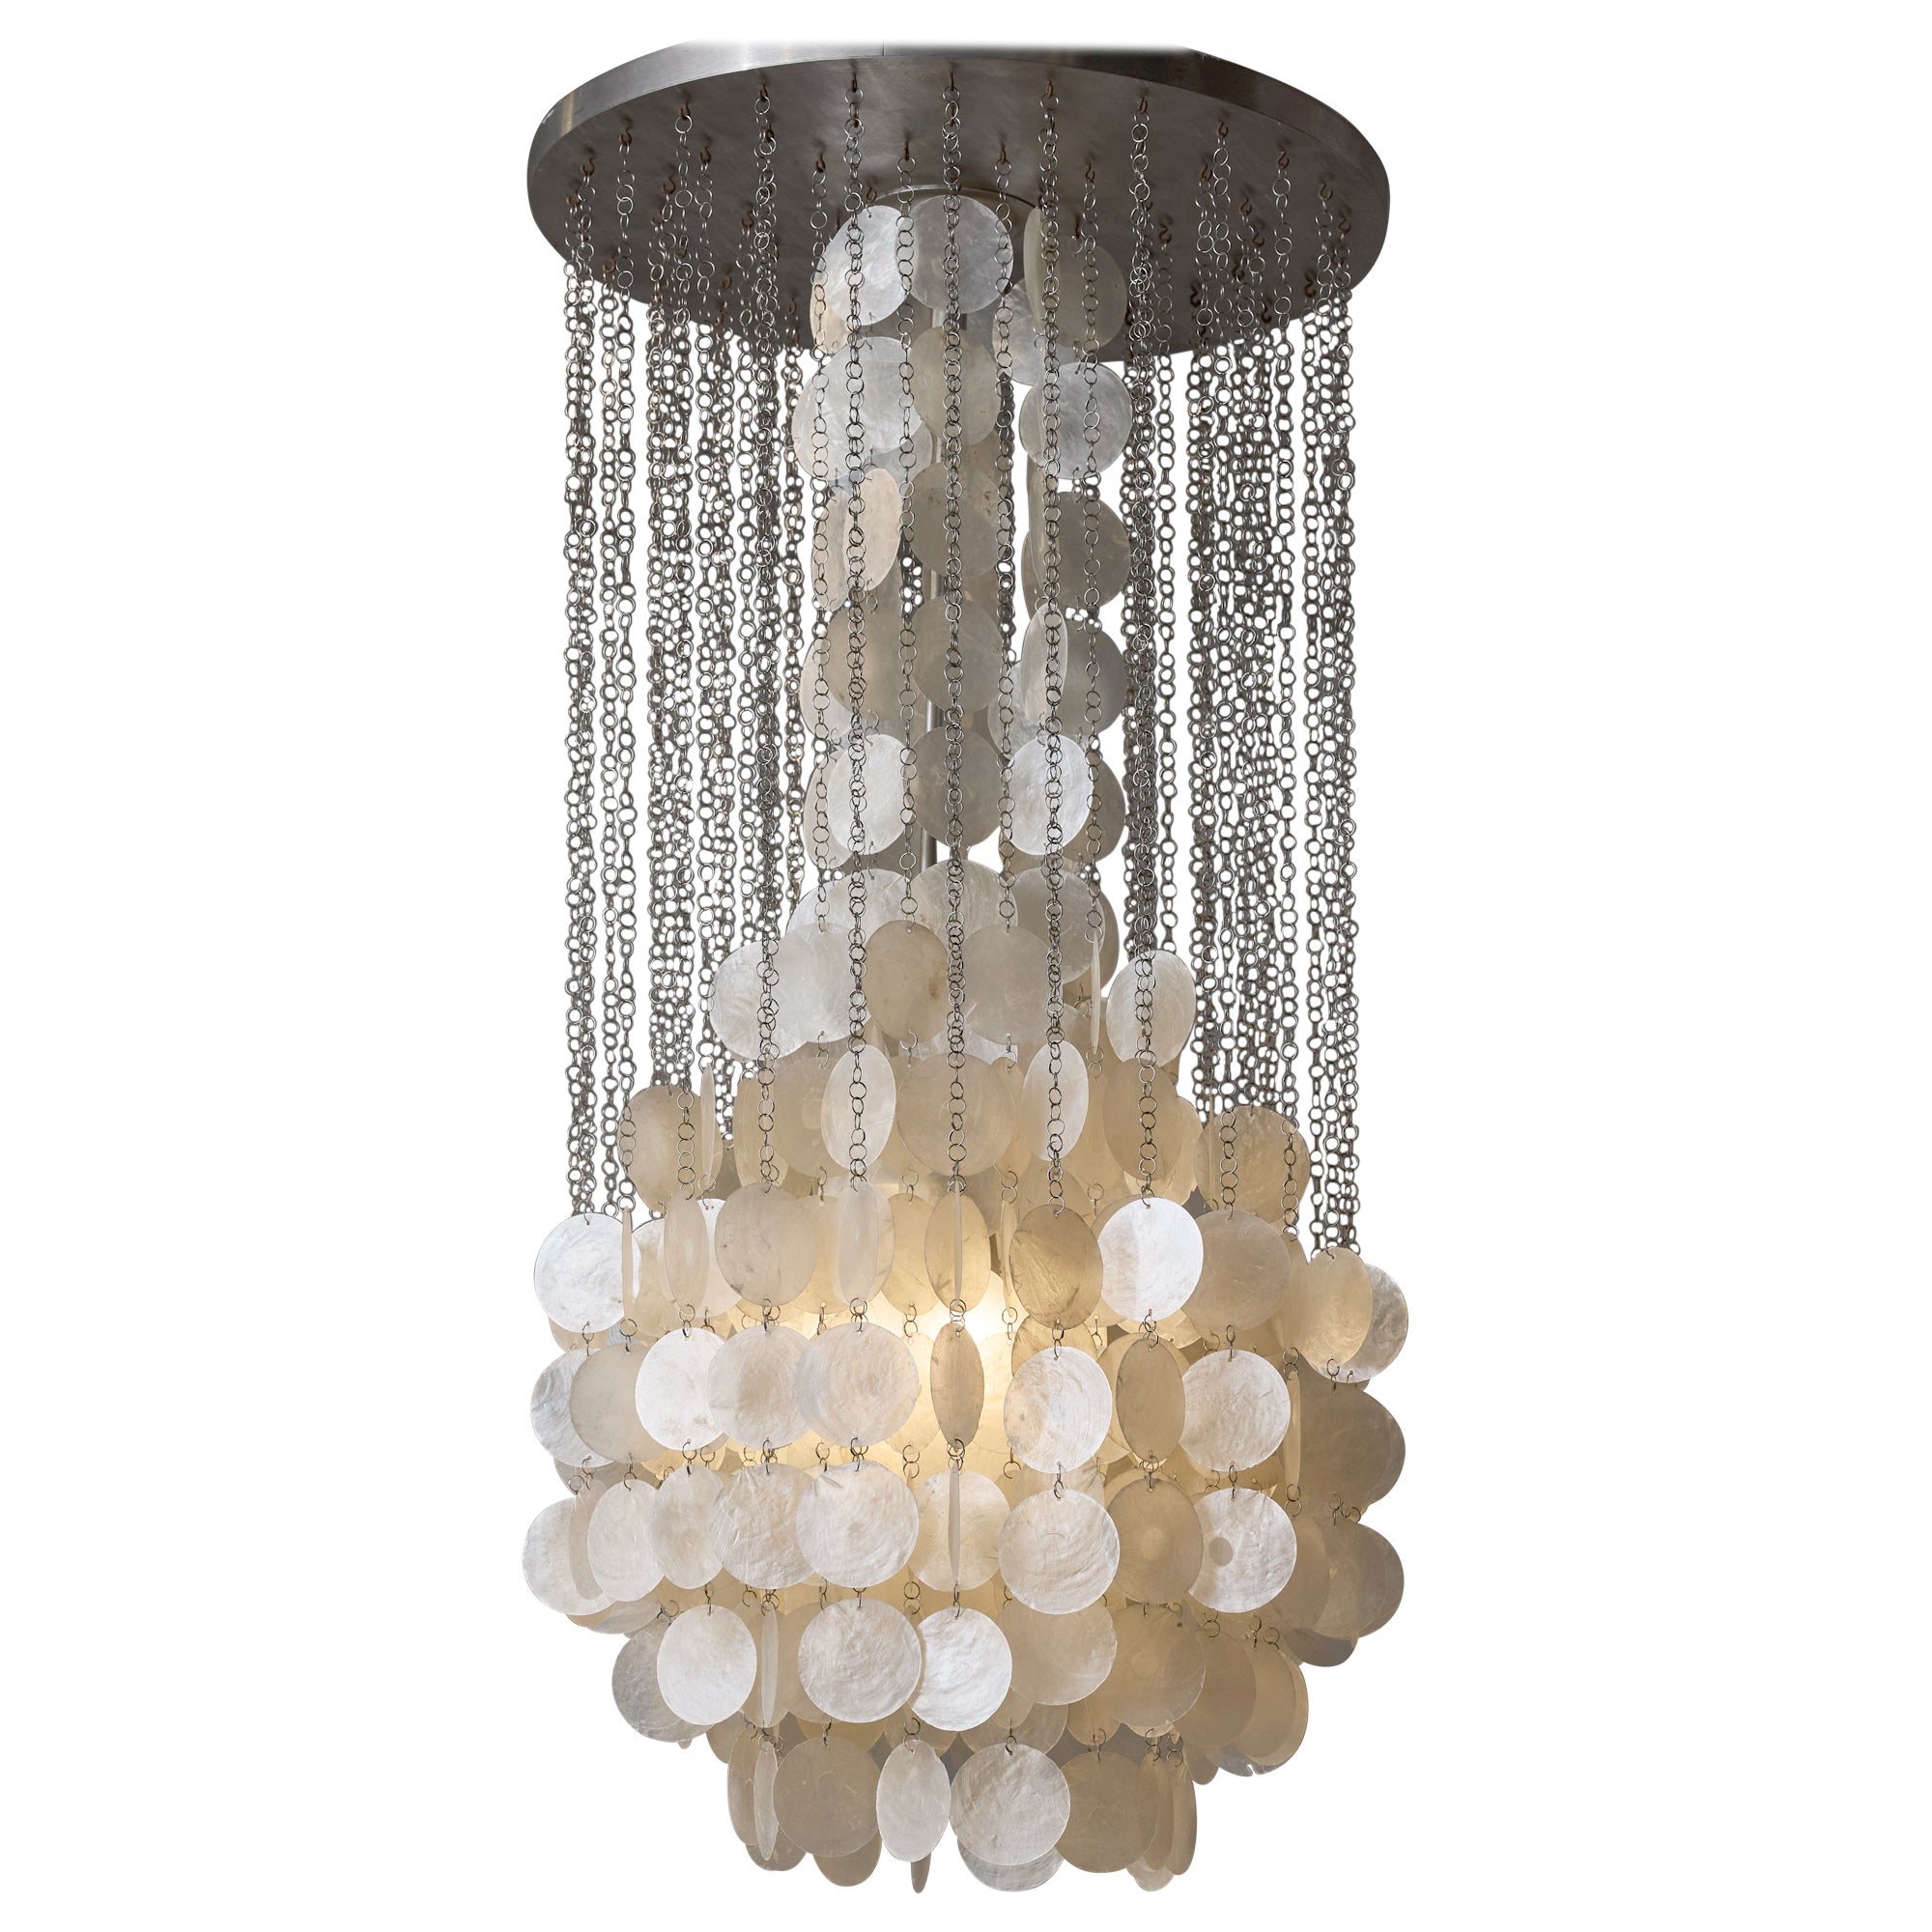 Mother of Pearl Chandelier with Aluminium ceiling plate and Metal Chain